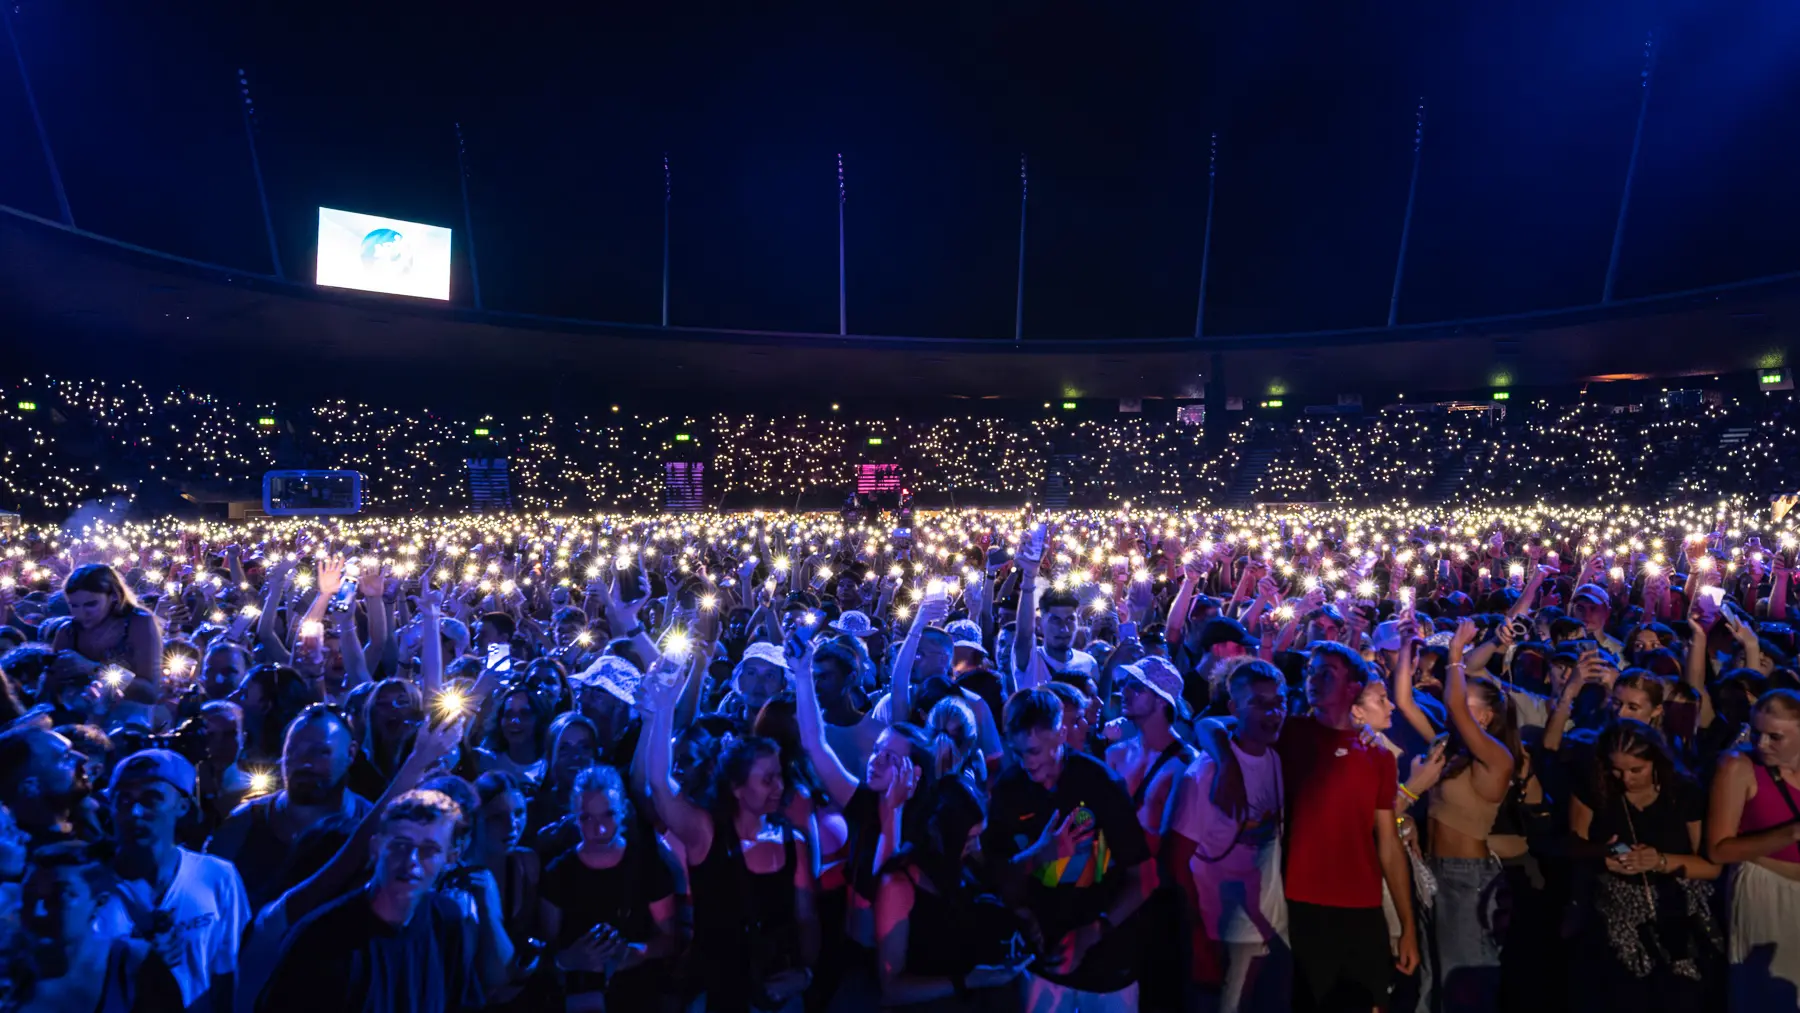 a large crowd of people in a stadium with lights